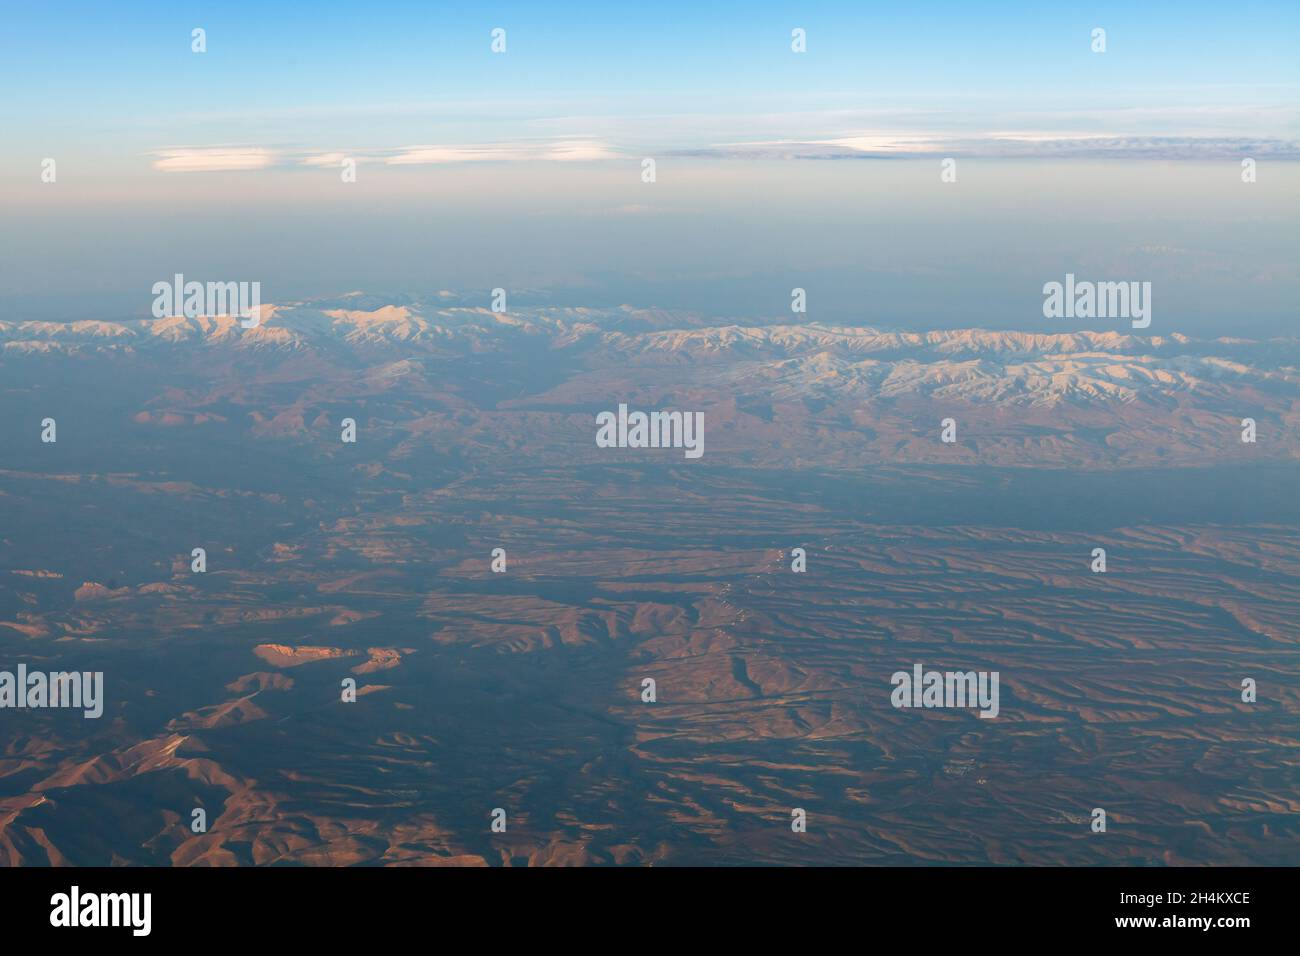 Aerial view of Zagros mountains, between Iraq and Iran Stock Photo